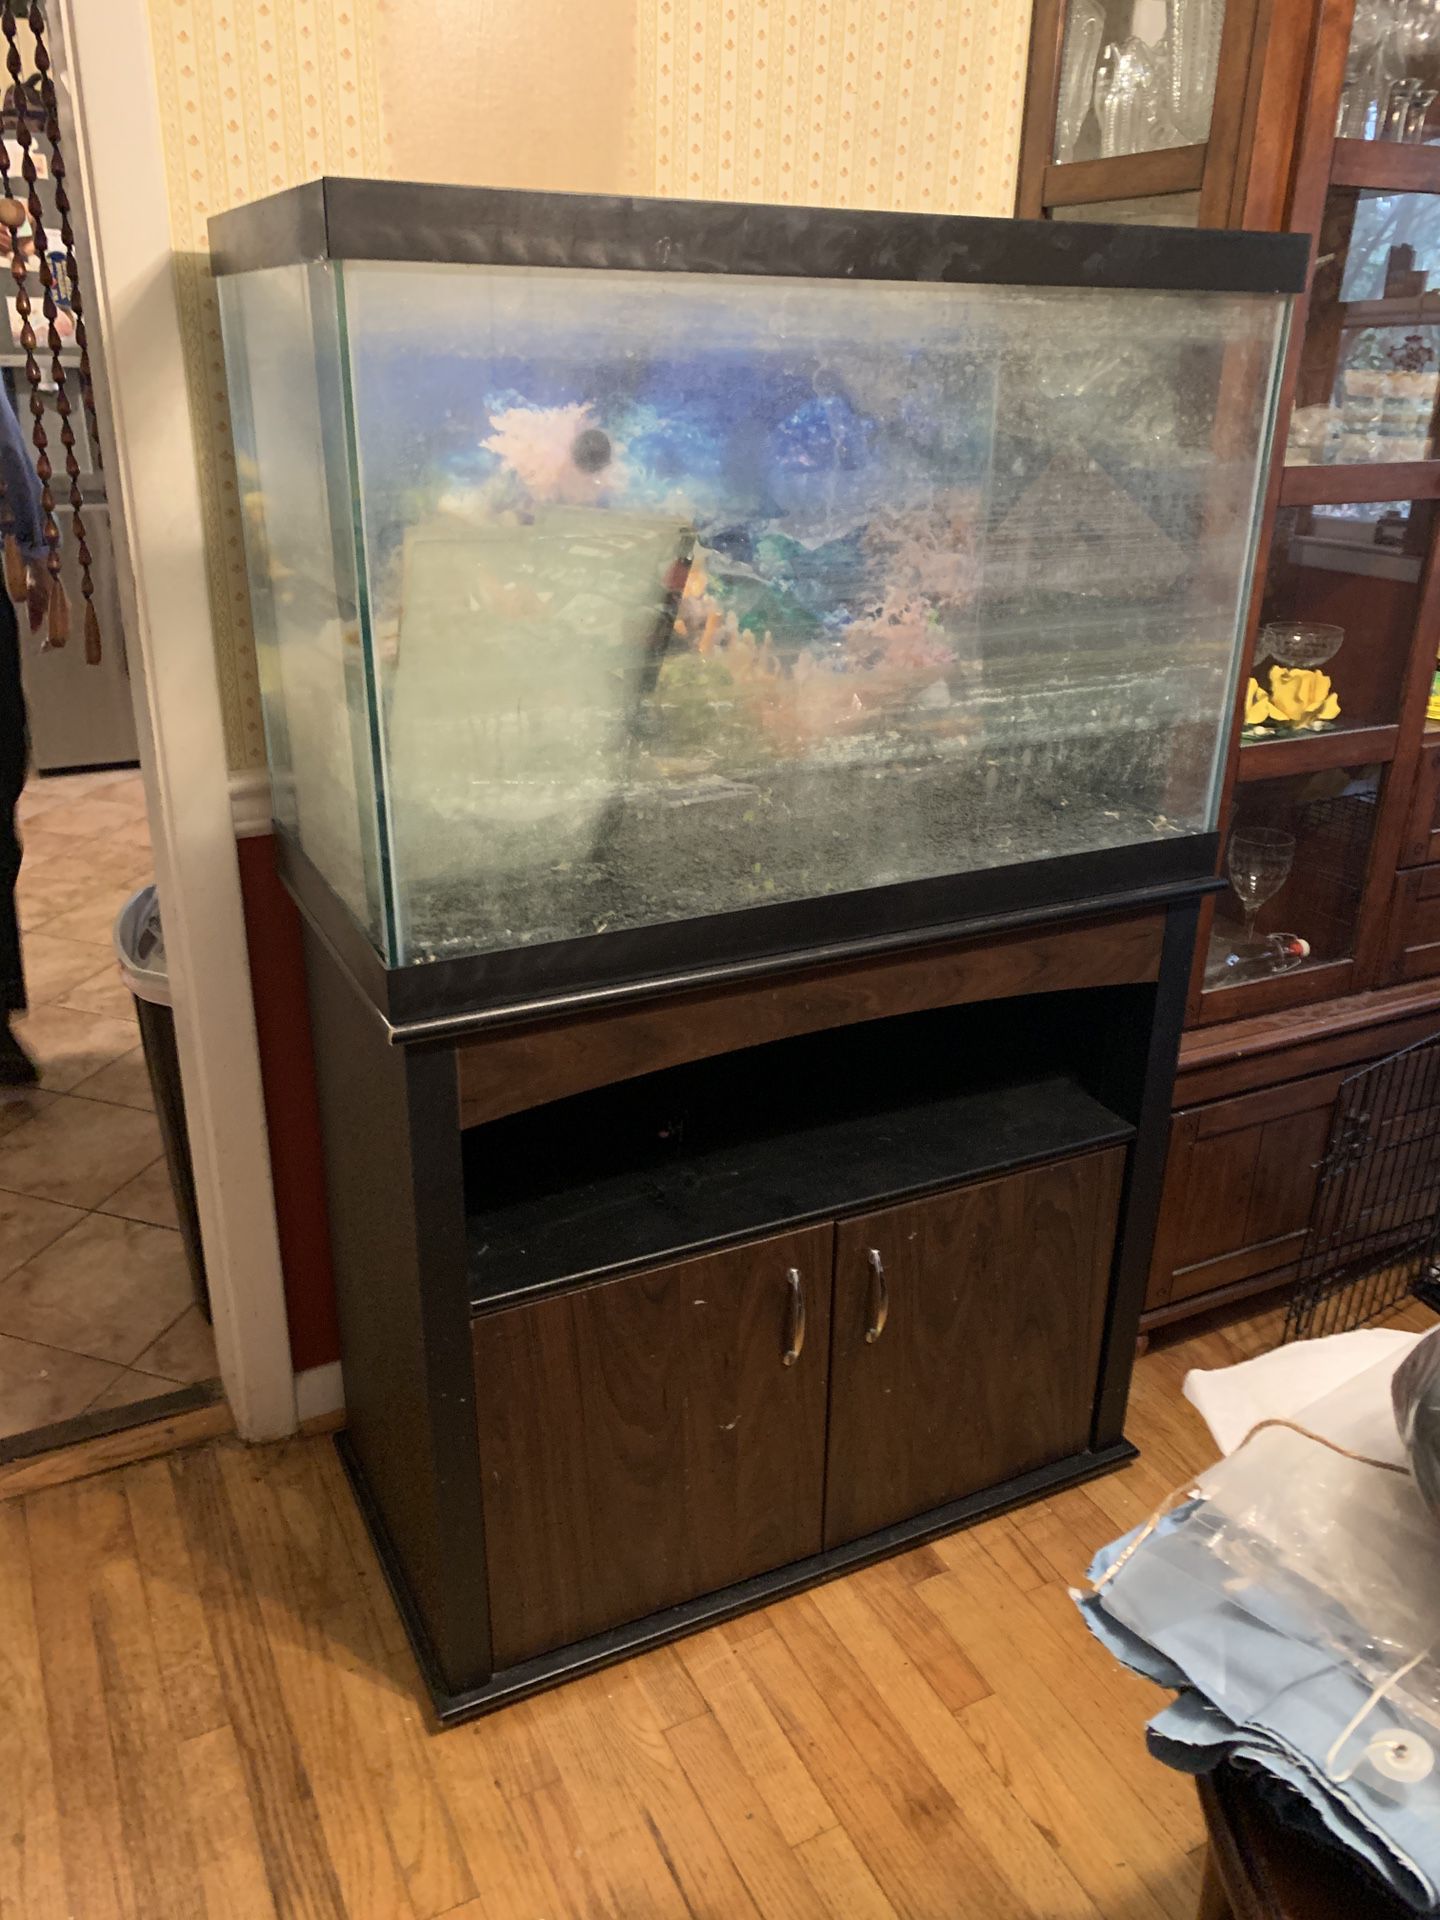 55 Gallon Fish Thank W/stand And Supplies